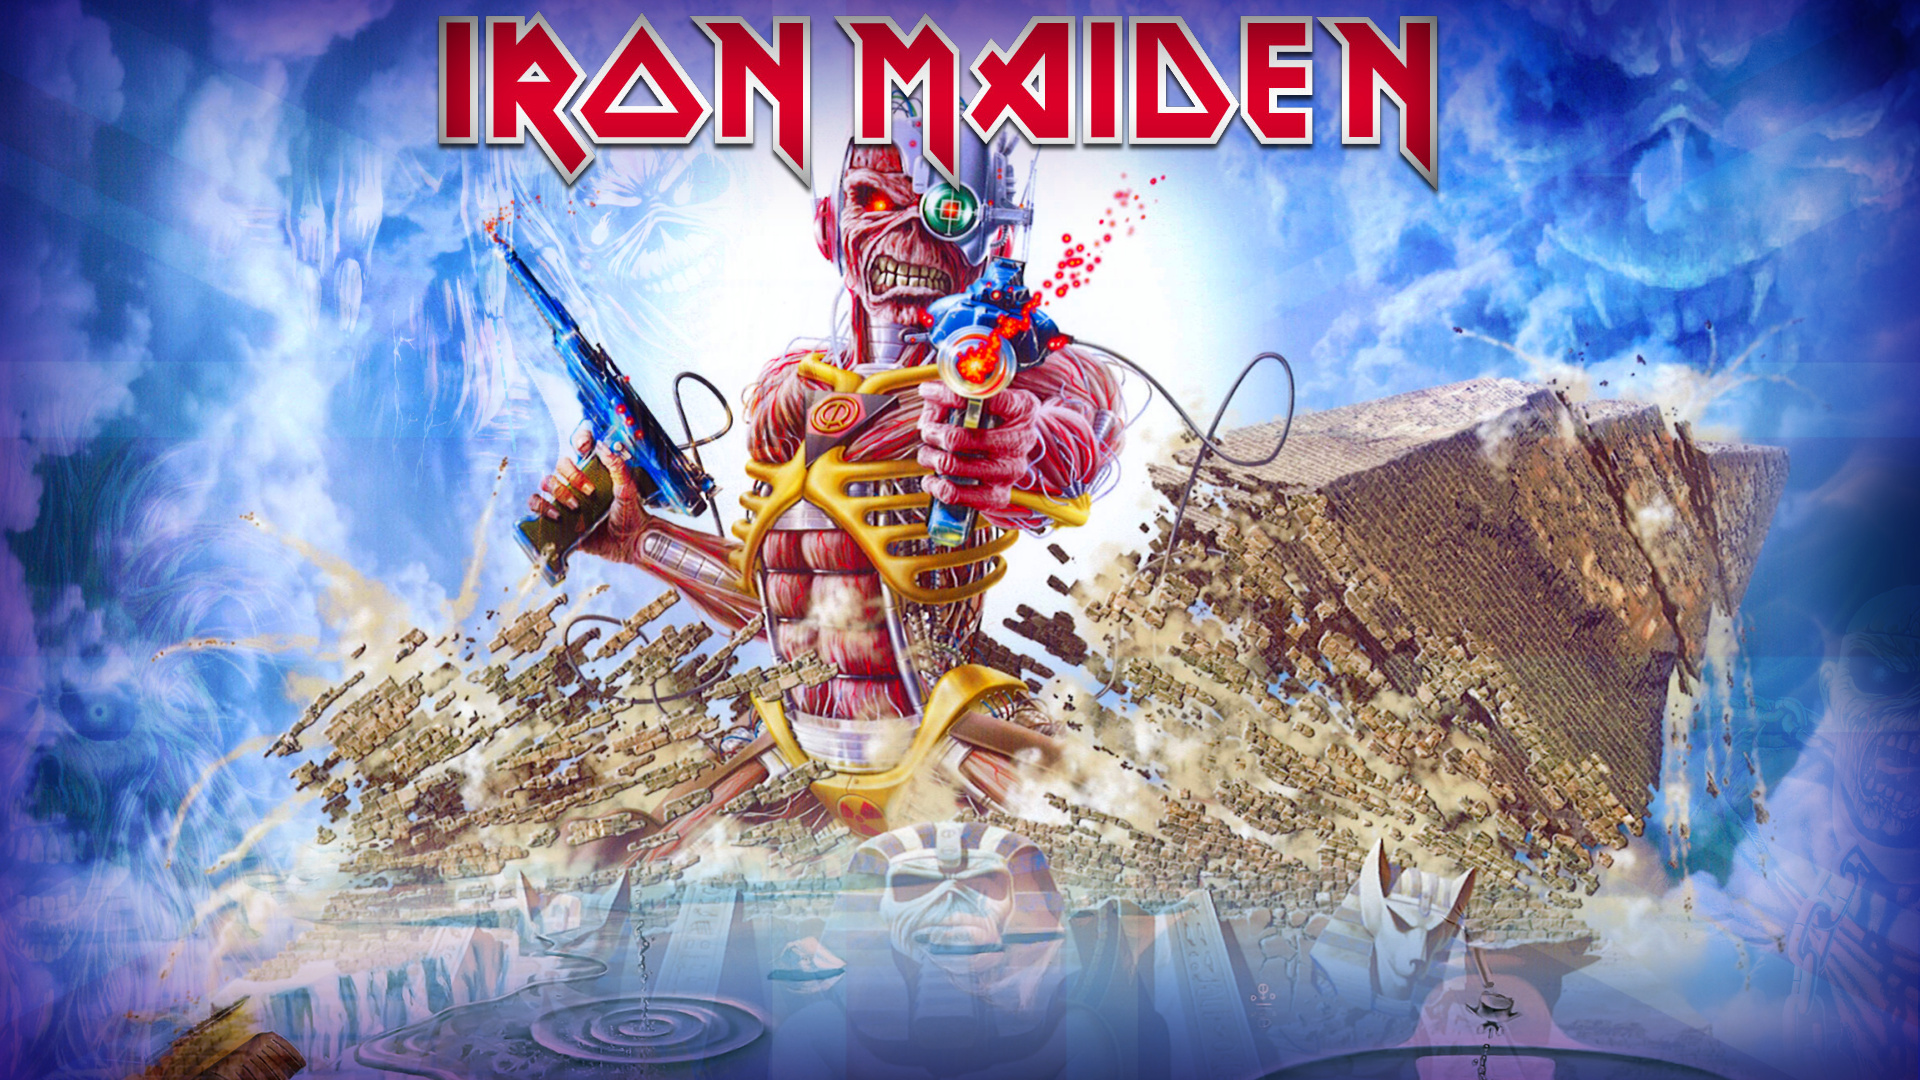 Iron Maiden Band Music, Iconic band logo, Symbol of metal, Recognizable insignia, 1920x1080 Full HD Desktop